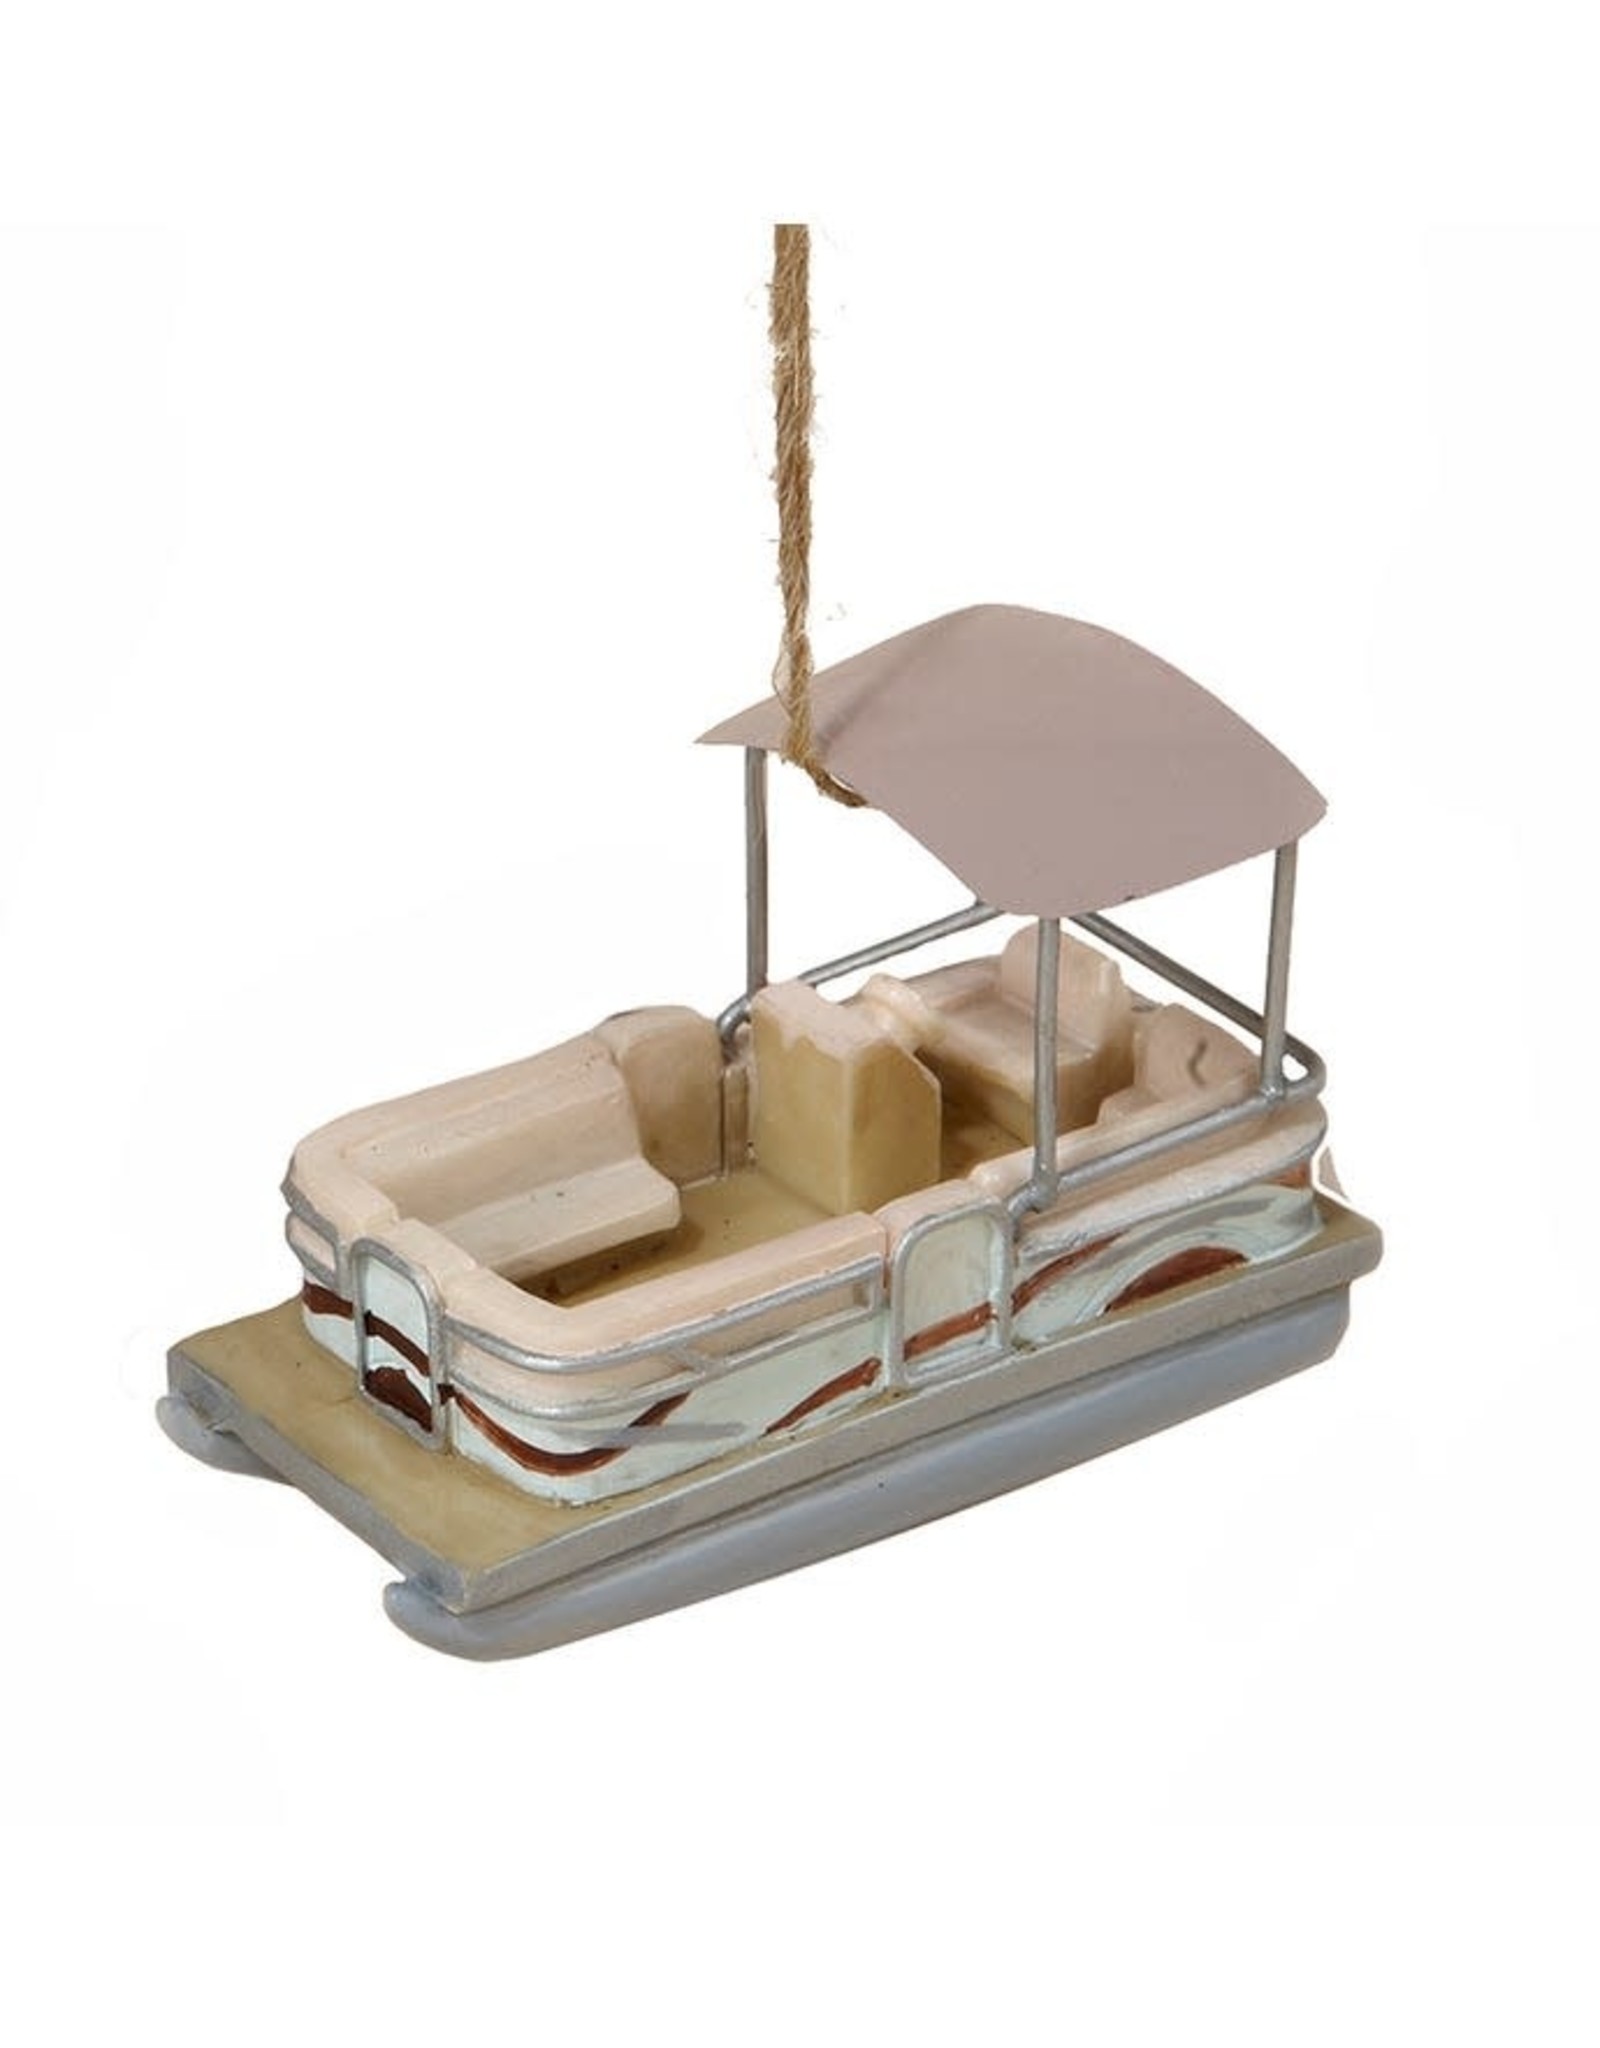 Pontoon Boat Gifts, Pontoon Boats, Pontoon Boat Accessories Gifts